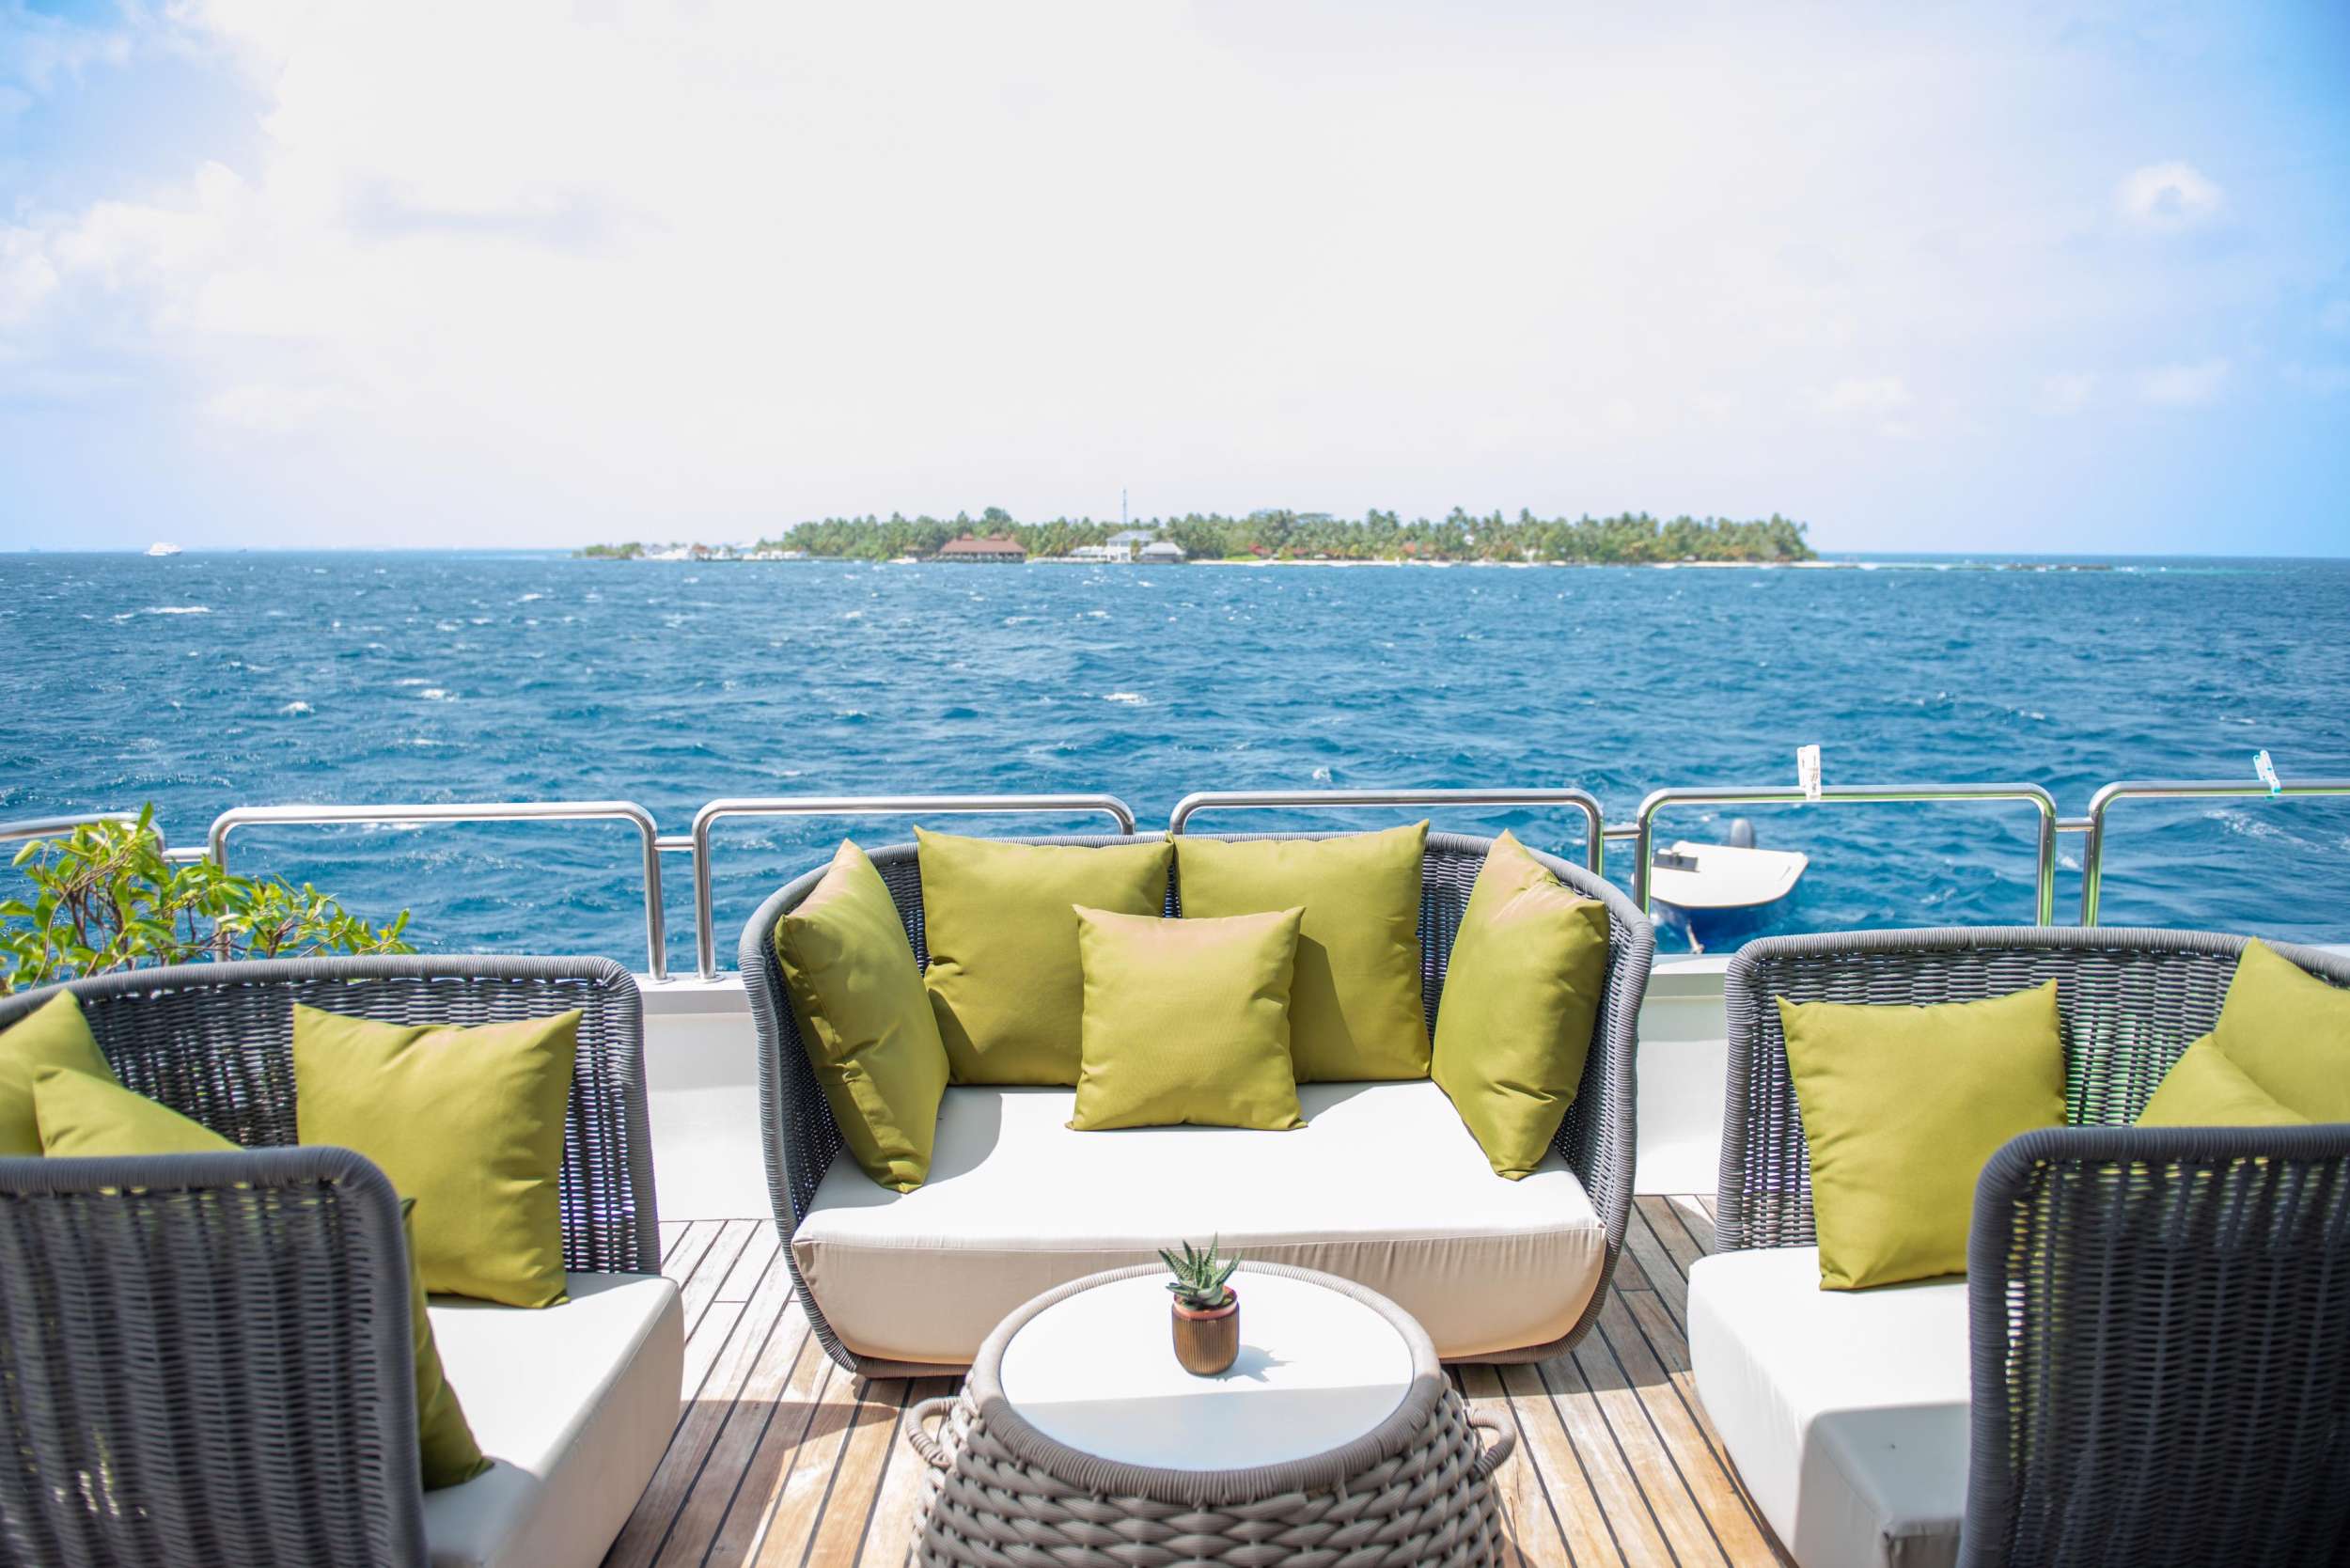 ARK NOBLE - Yacht Charter Langkawi & Boat hire in Indian Ocean & SE Asia 6